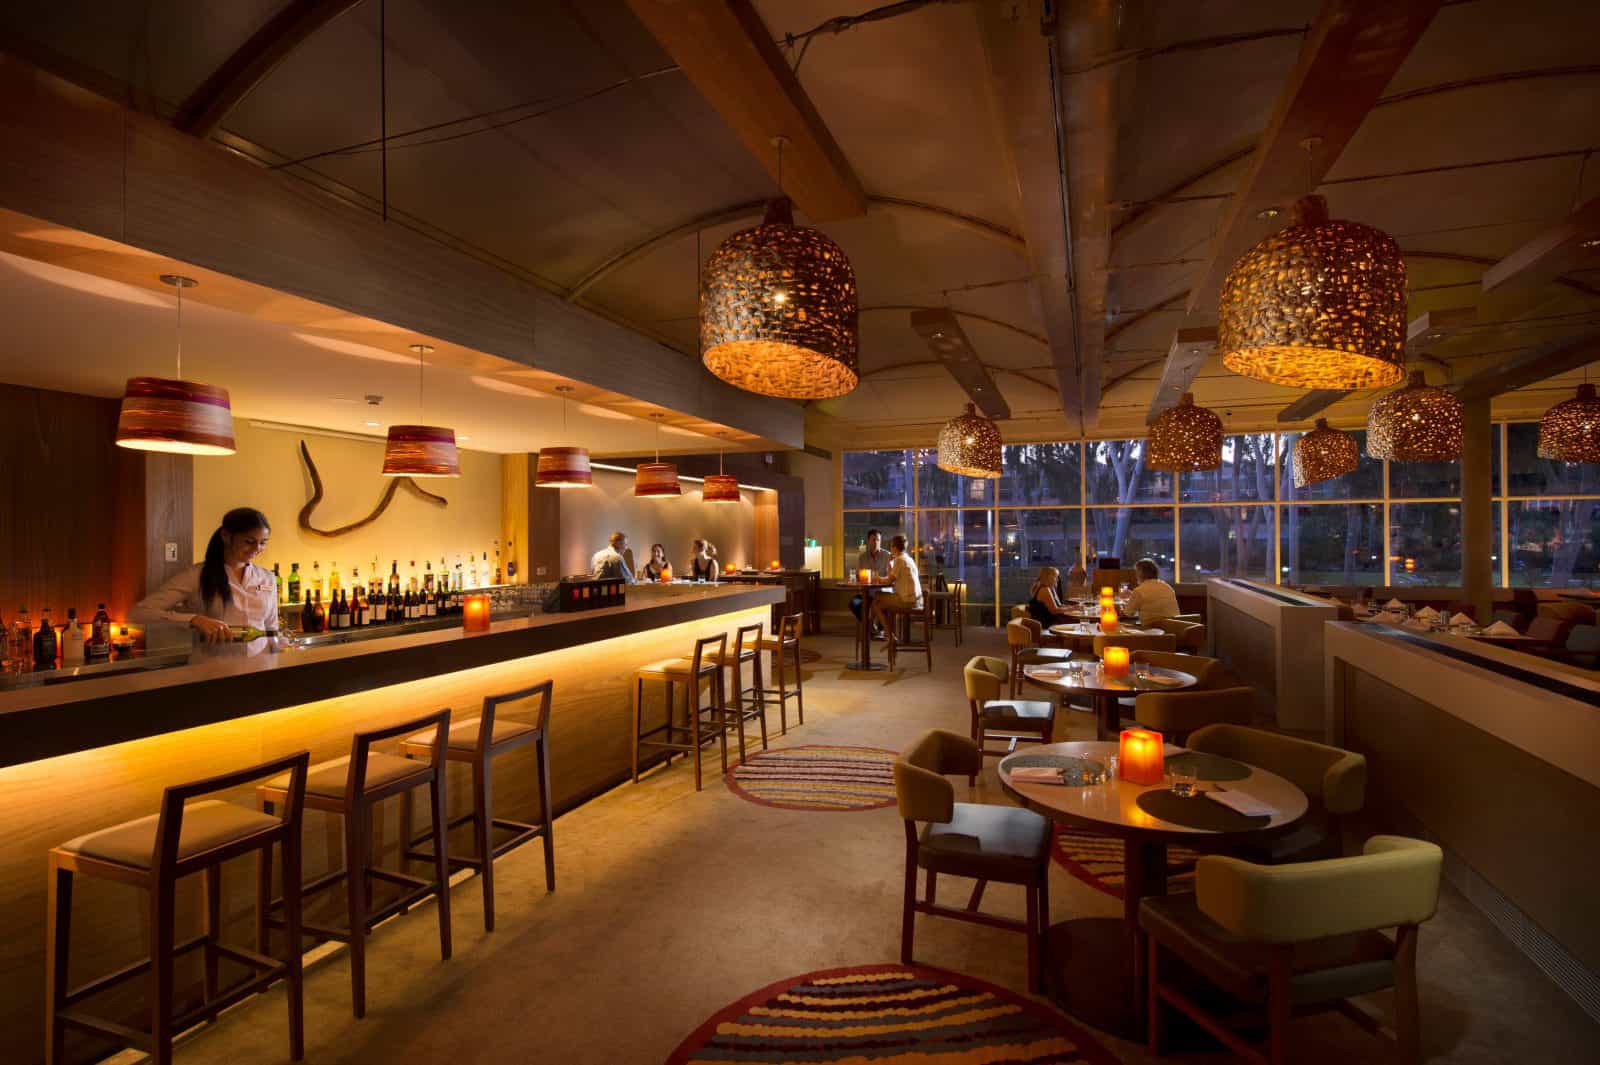 Enjoy cocktails, music and culinary temptations in the Walpa Lobby Bar.